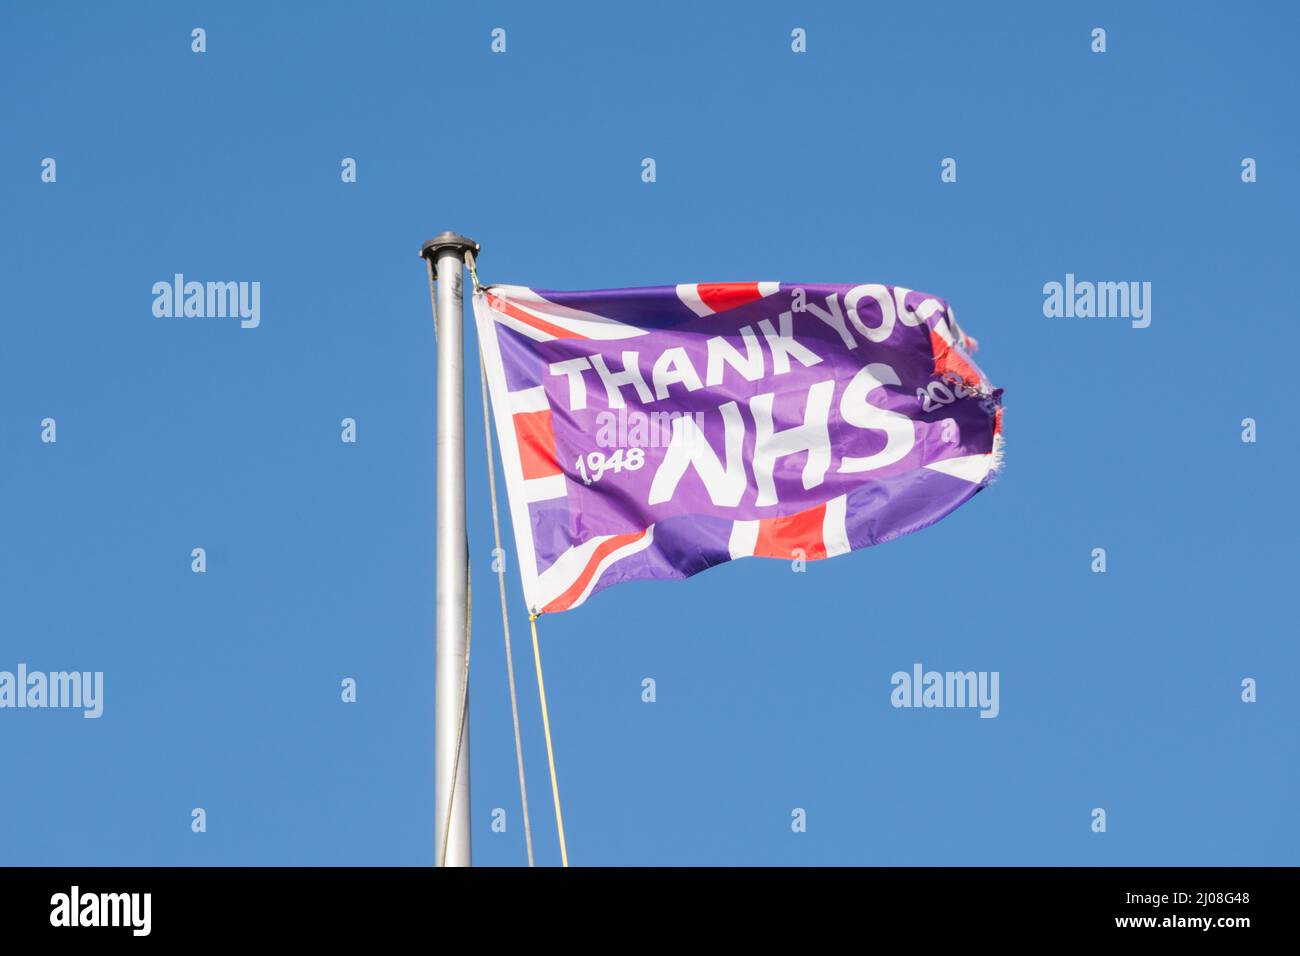 Thank You NHS flag fluttering in a bright blue sky, London, England, UK Stock Photo